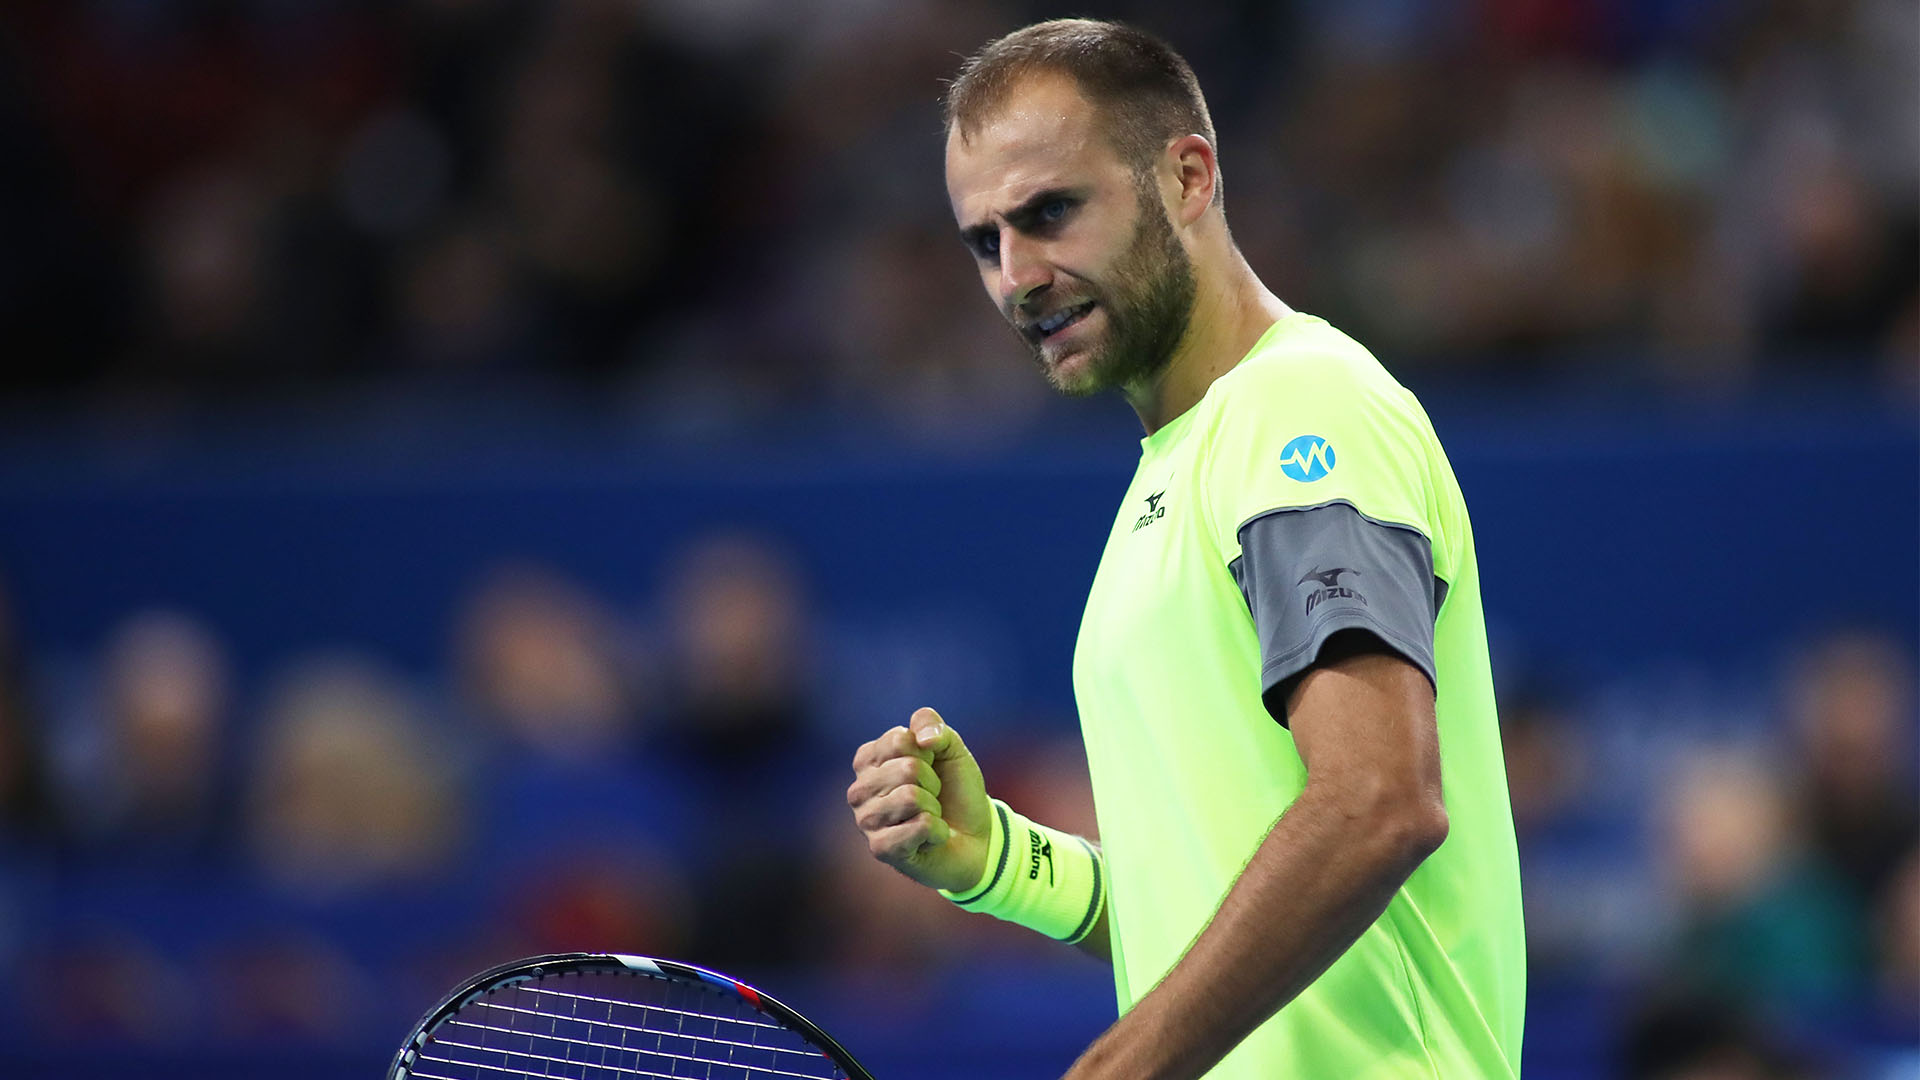 From a professional to a rookie: Marius Copil’s advice on choosing a tennis career